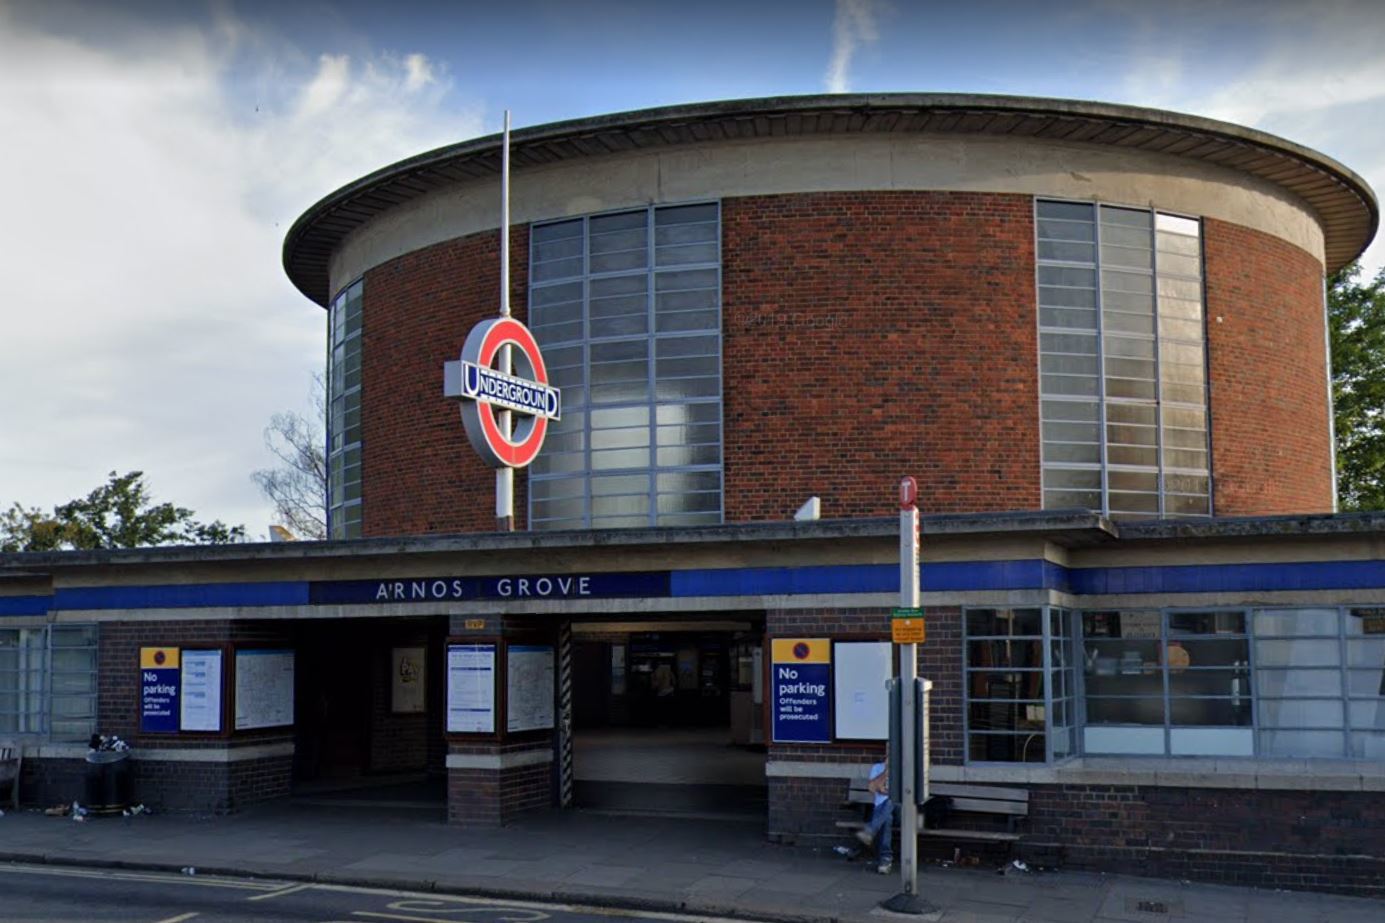 More details revealed about flats at Enfield tube station